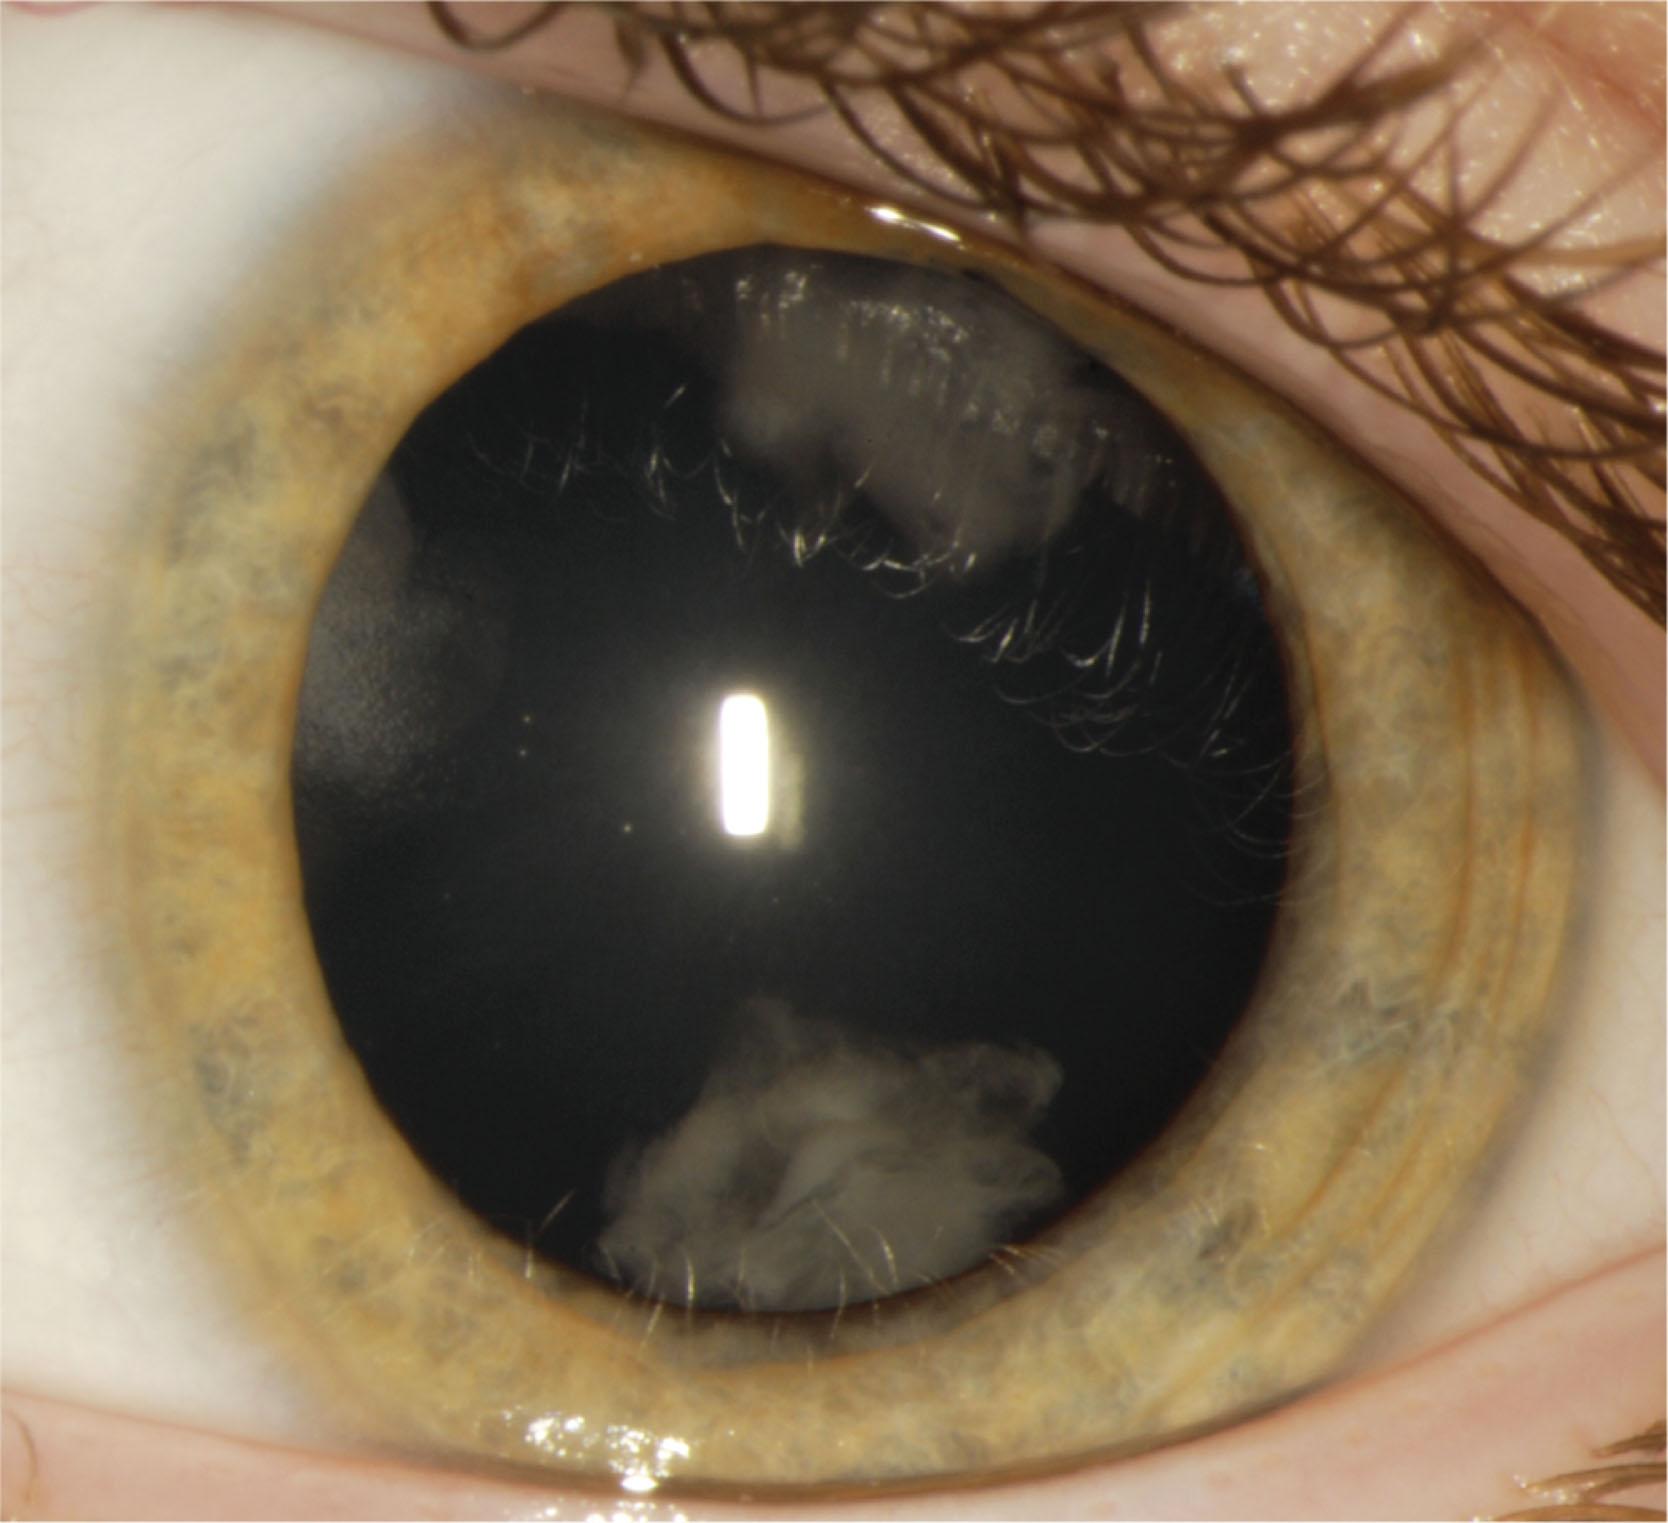 Fig. 35.11, Wedge-shaped cataracts. Peripheral wedge-shaped cataracts in a child with autism. Similar appearing cataracts occur in children with Stickler syndrome.